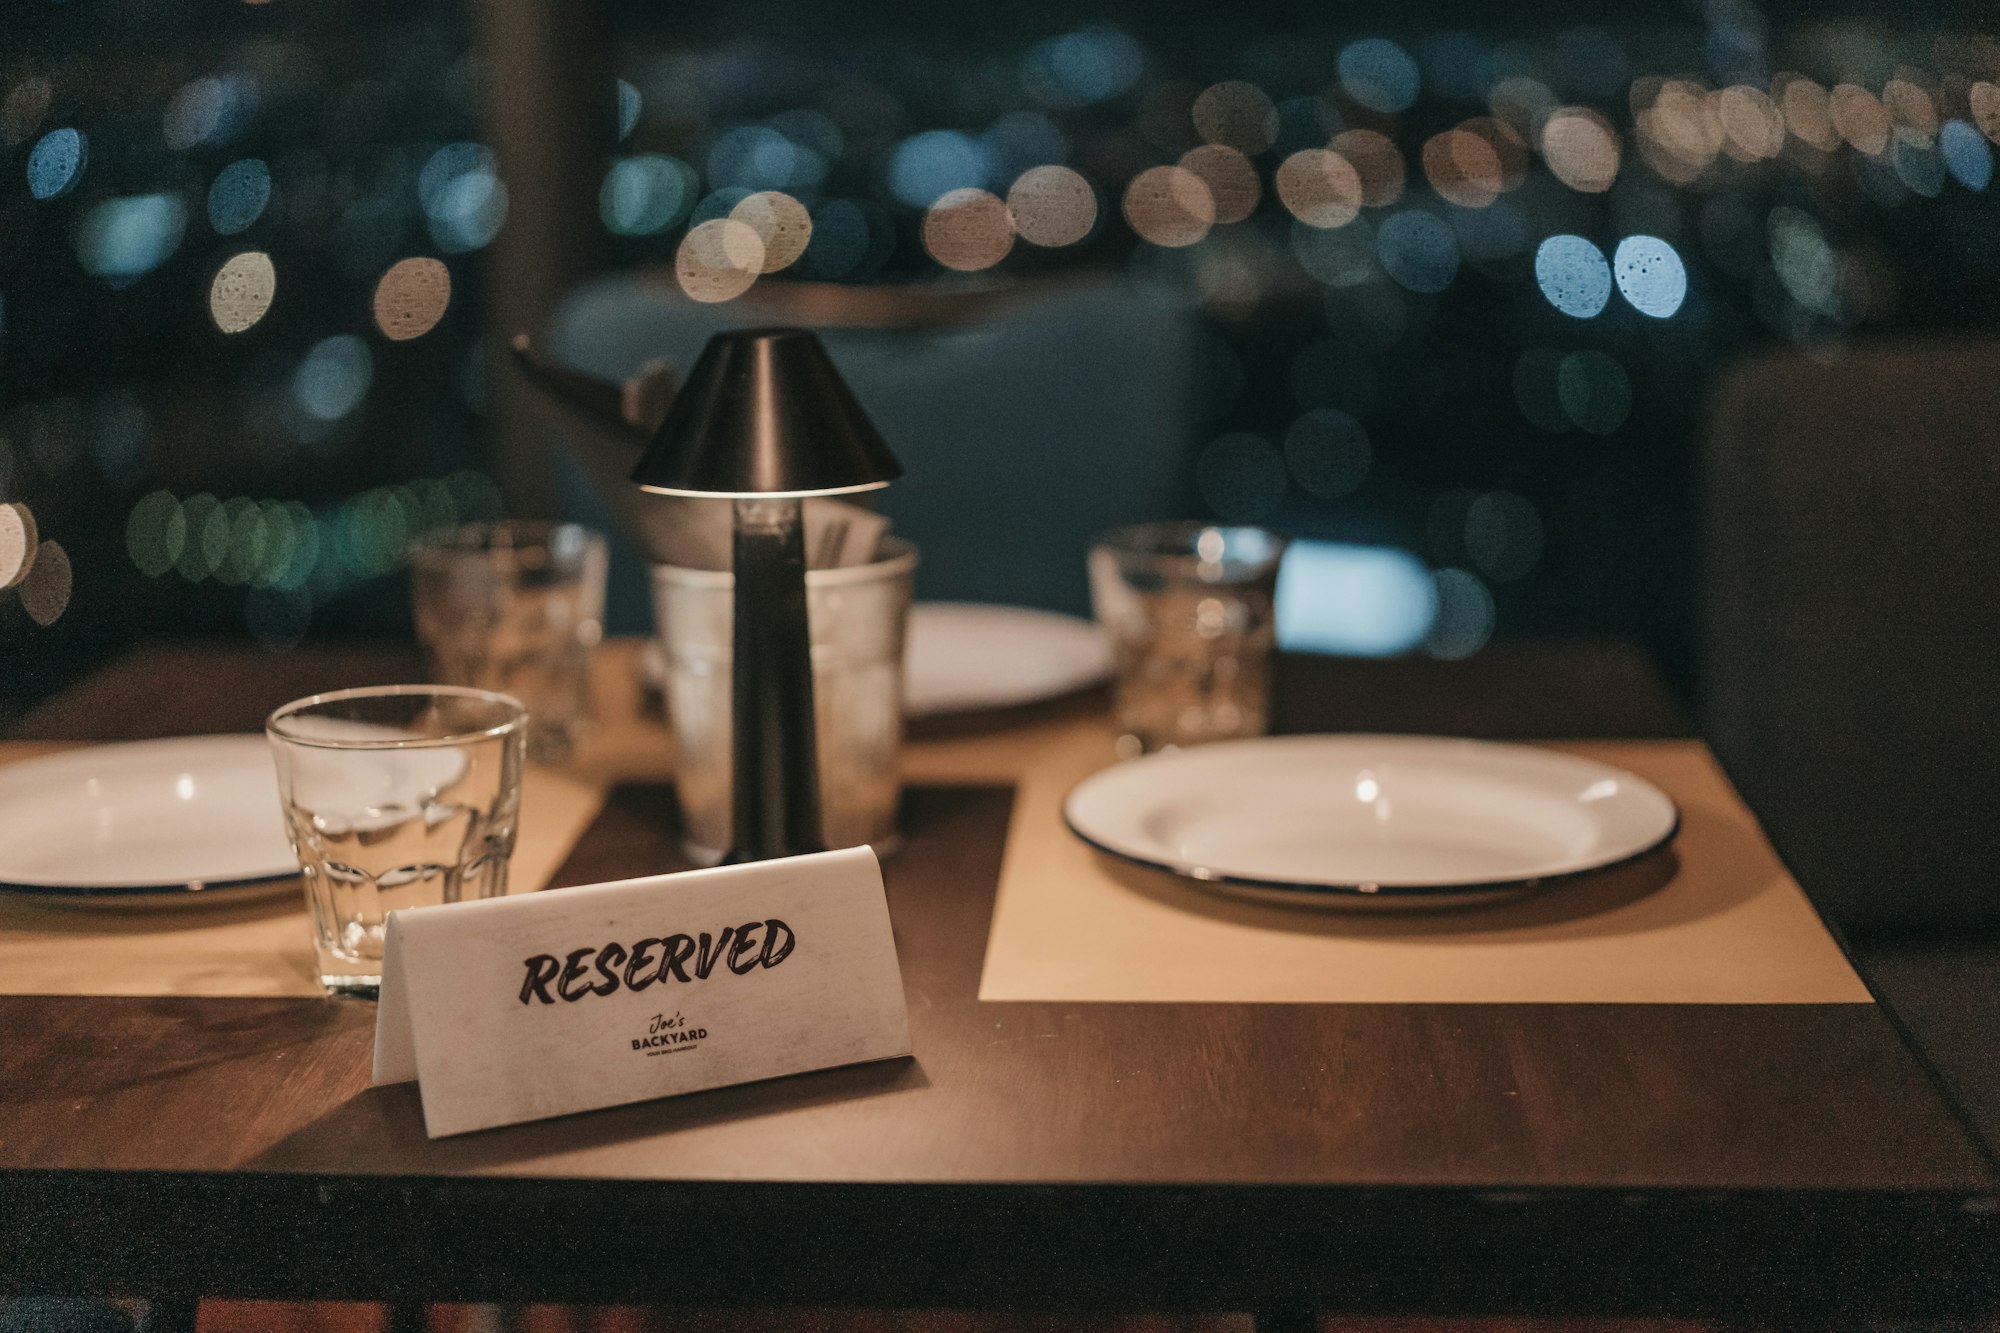 A table at a restaurant with a reserved sign on it